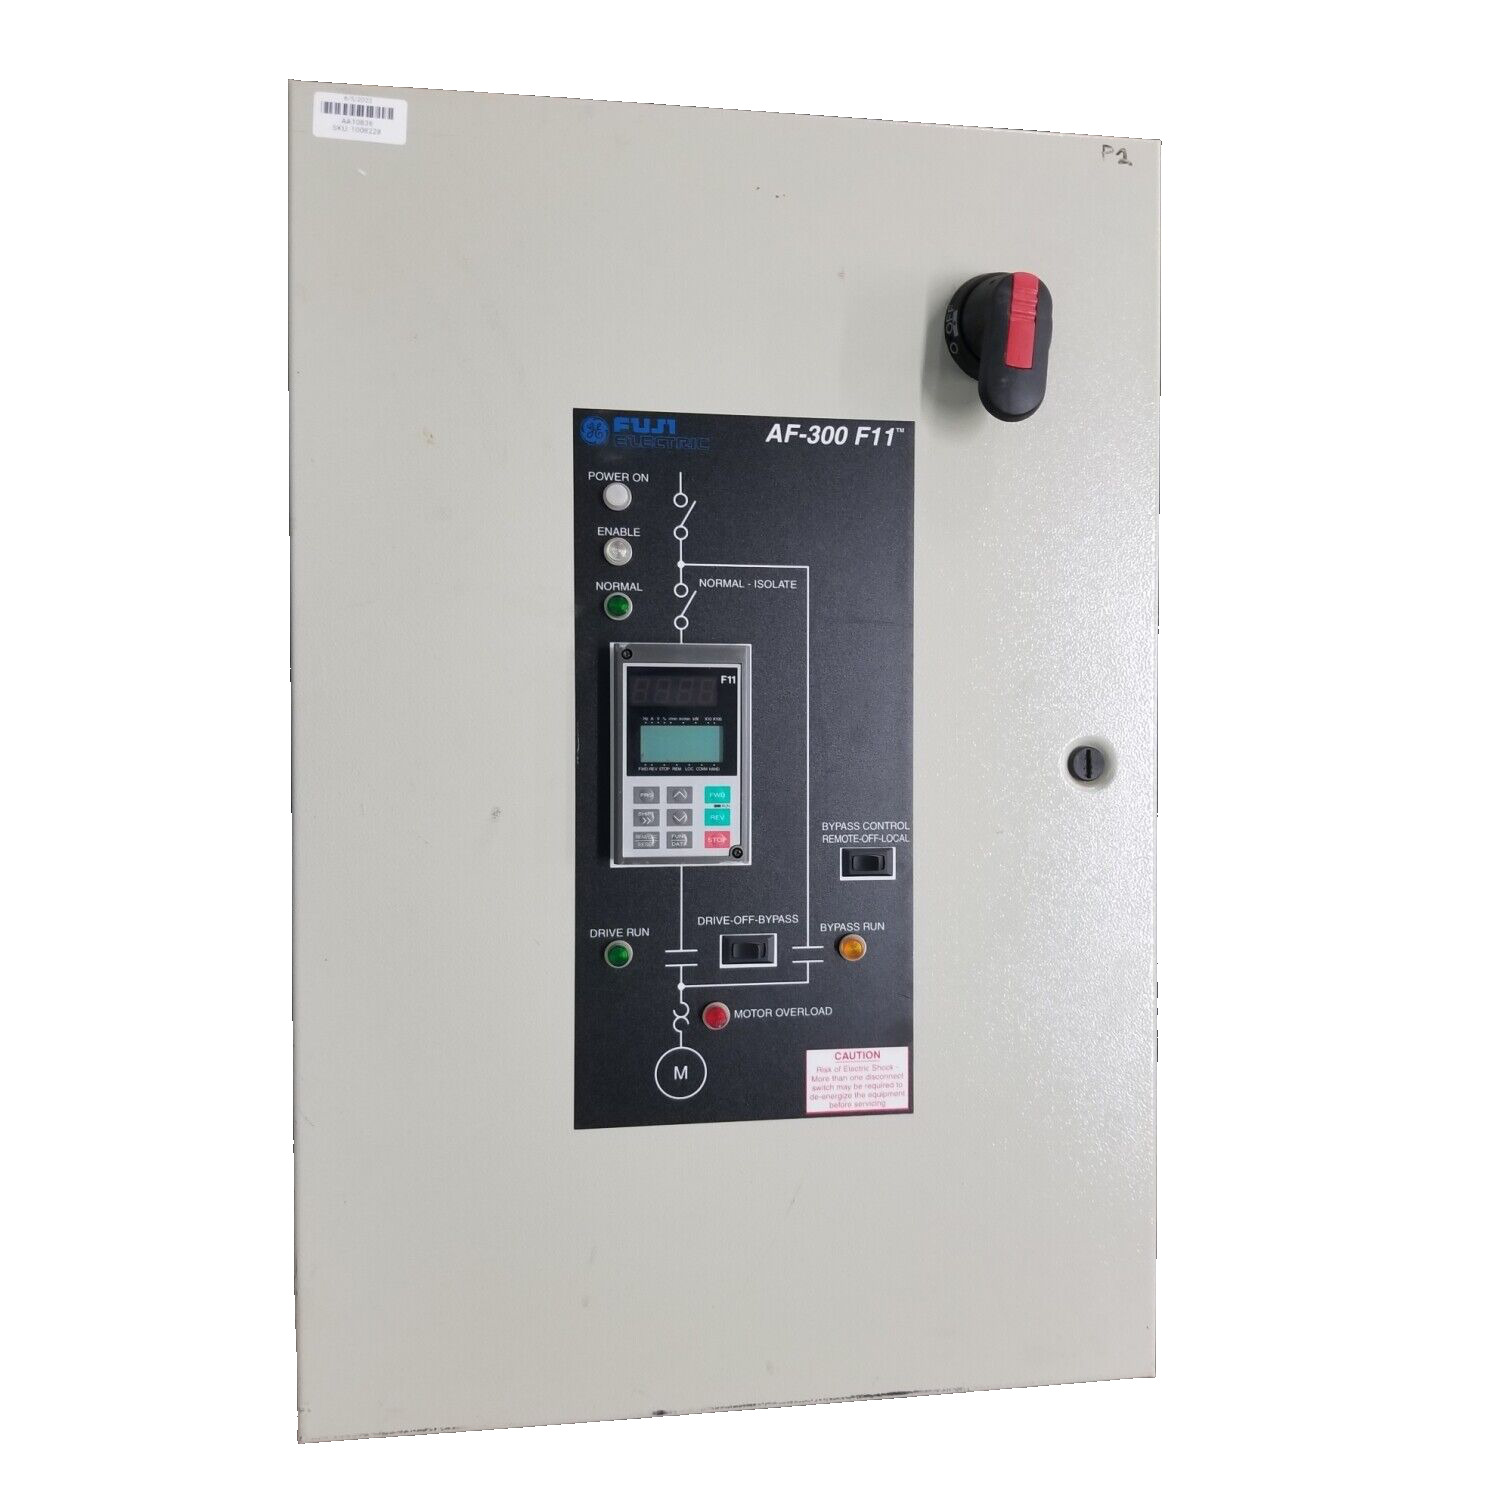 Fuji Electric AF-300 F11 Variable Frequency Motor Control Panel